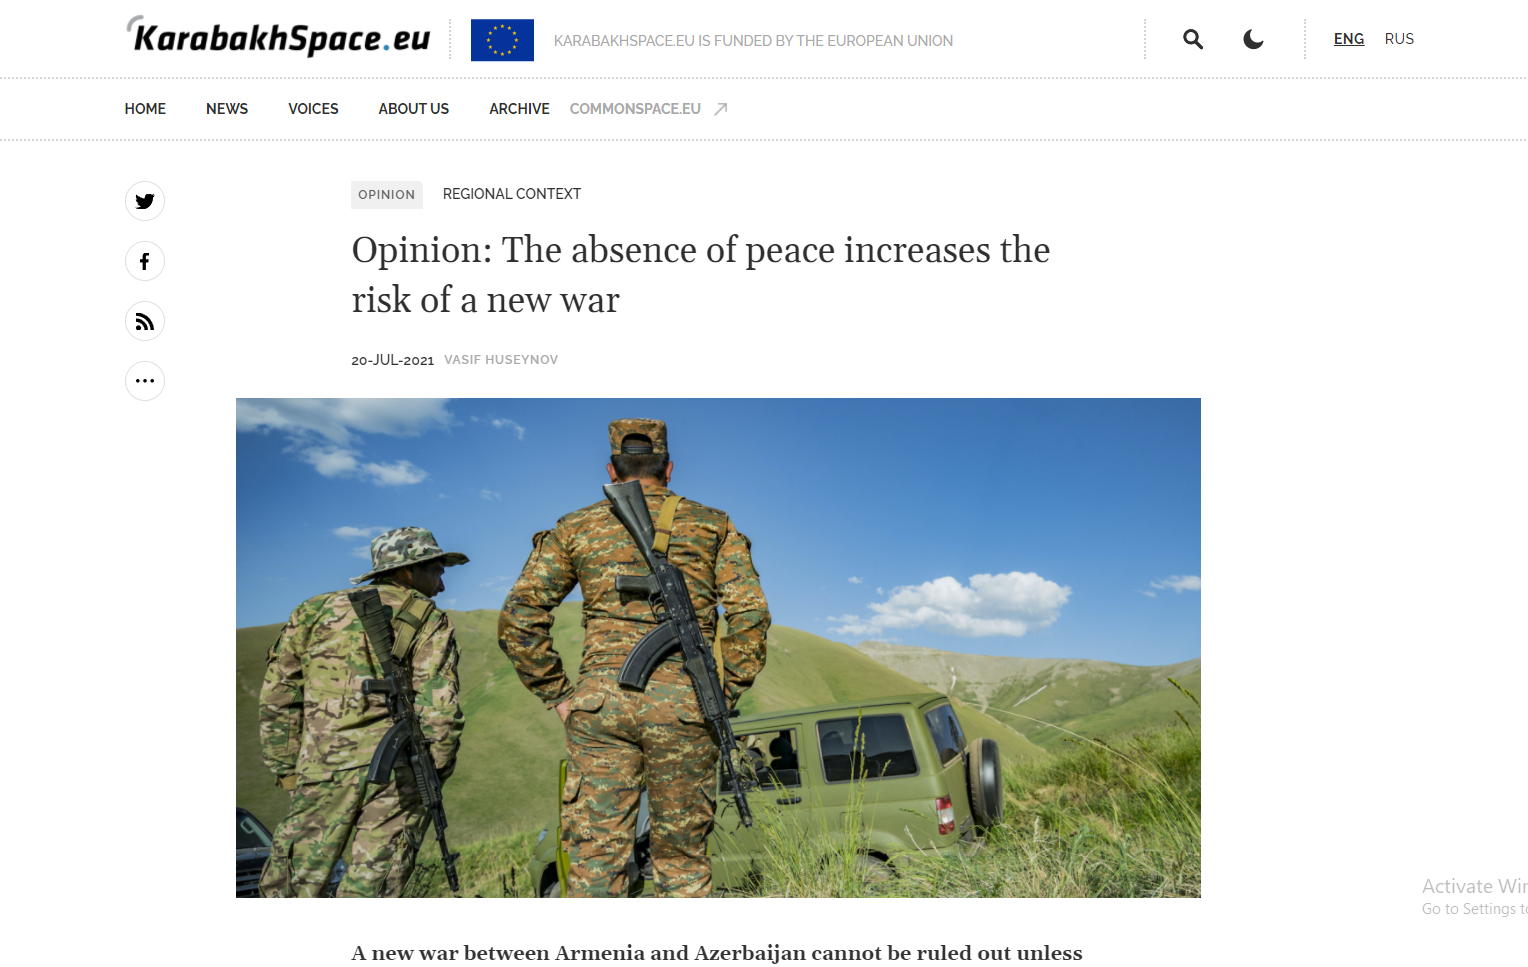 Opinion: The absence of peace increases the risk of a new war